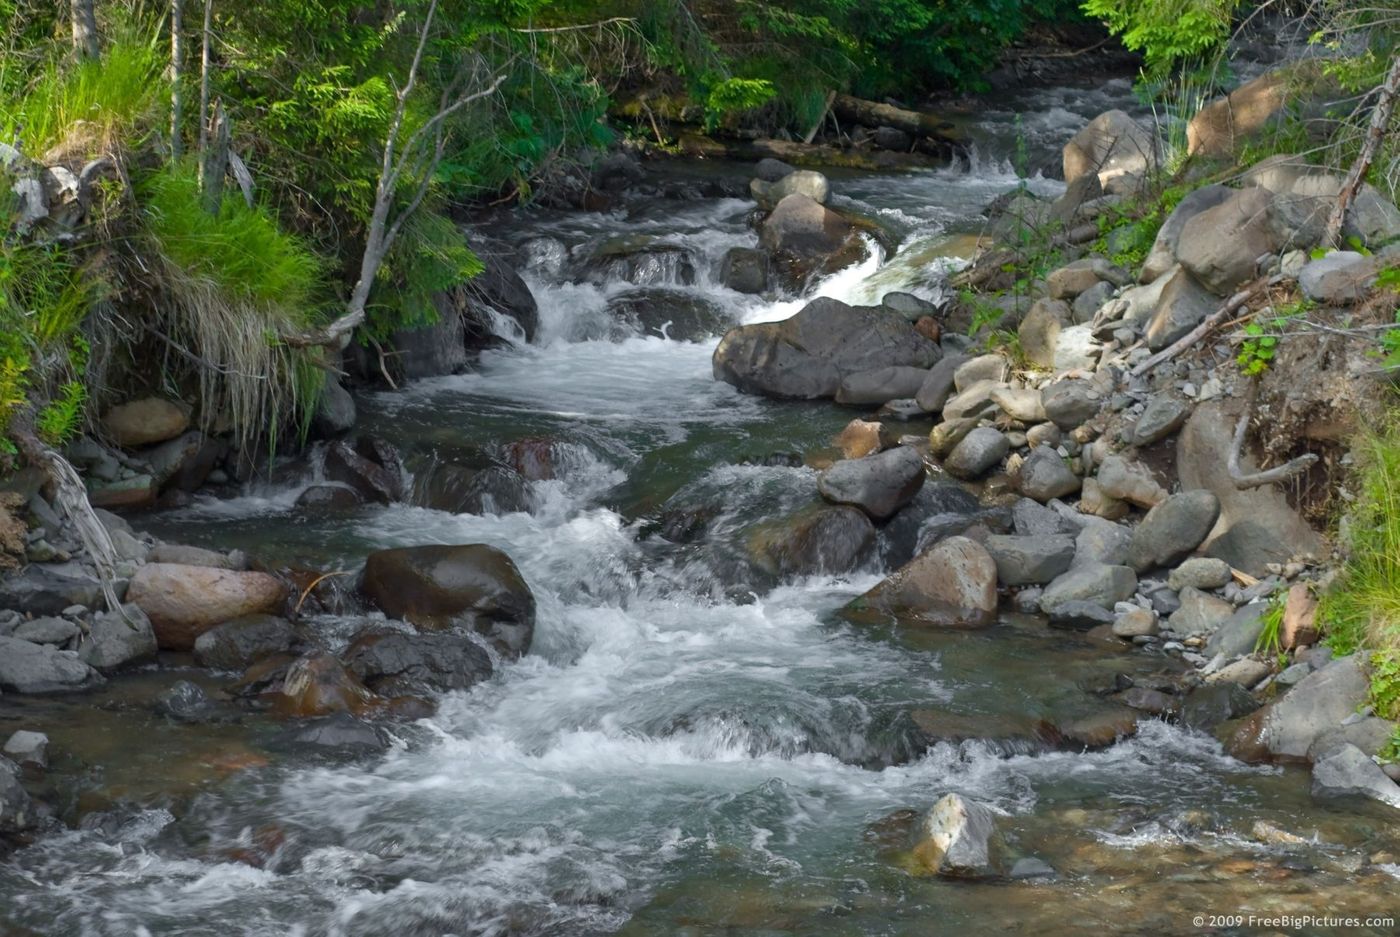 Stream health can tell us about an entire ecosystem. Photo: Livestream